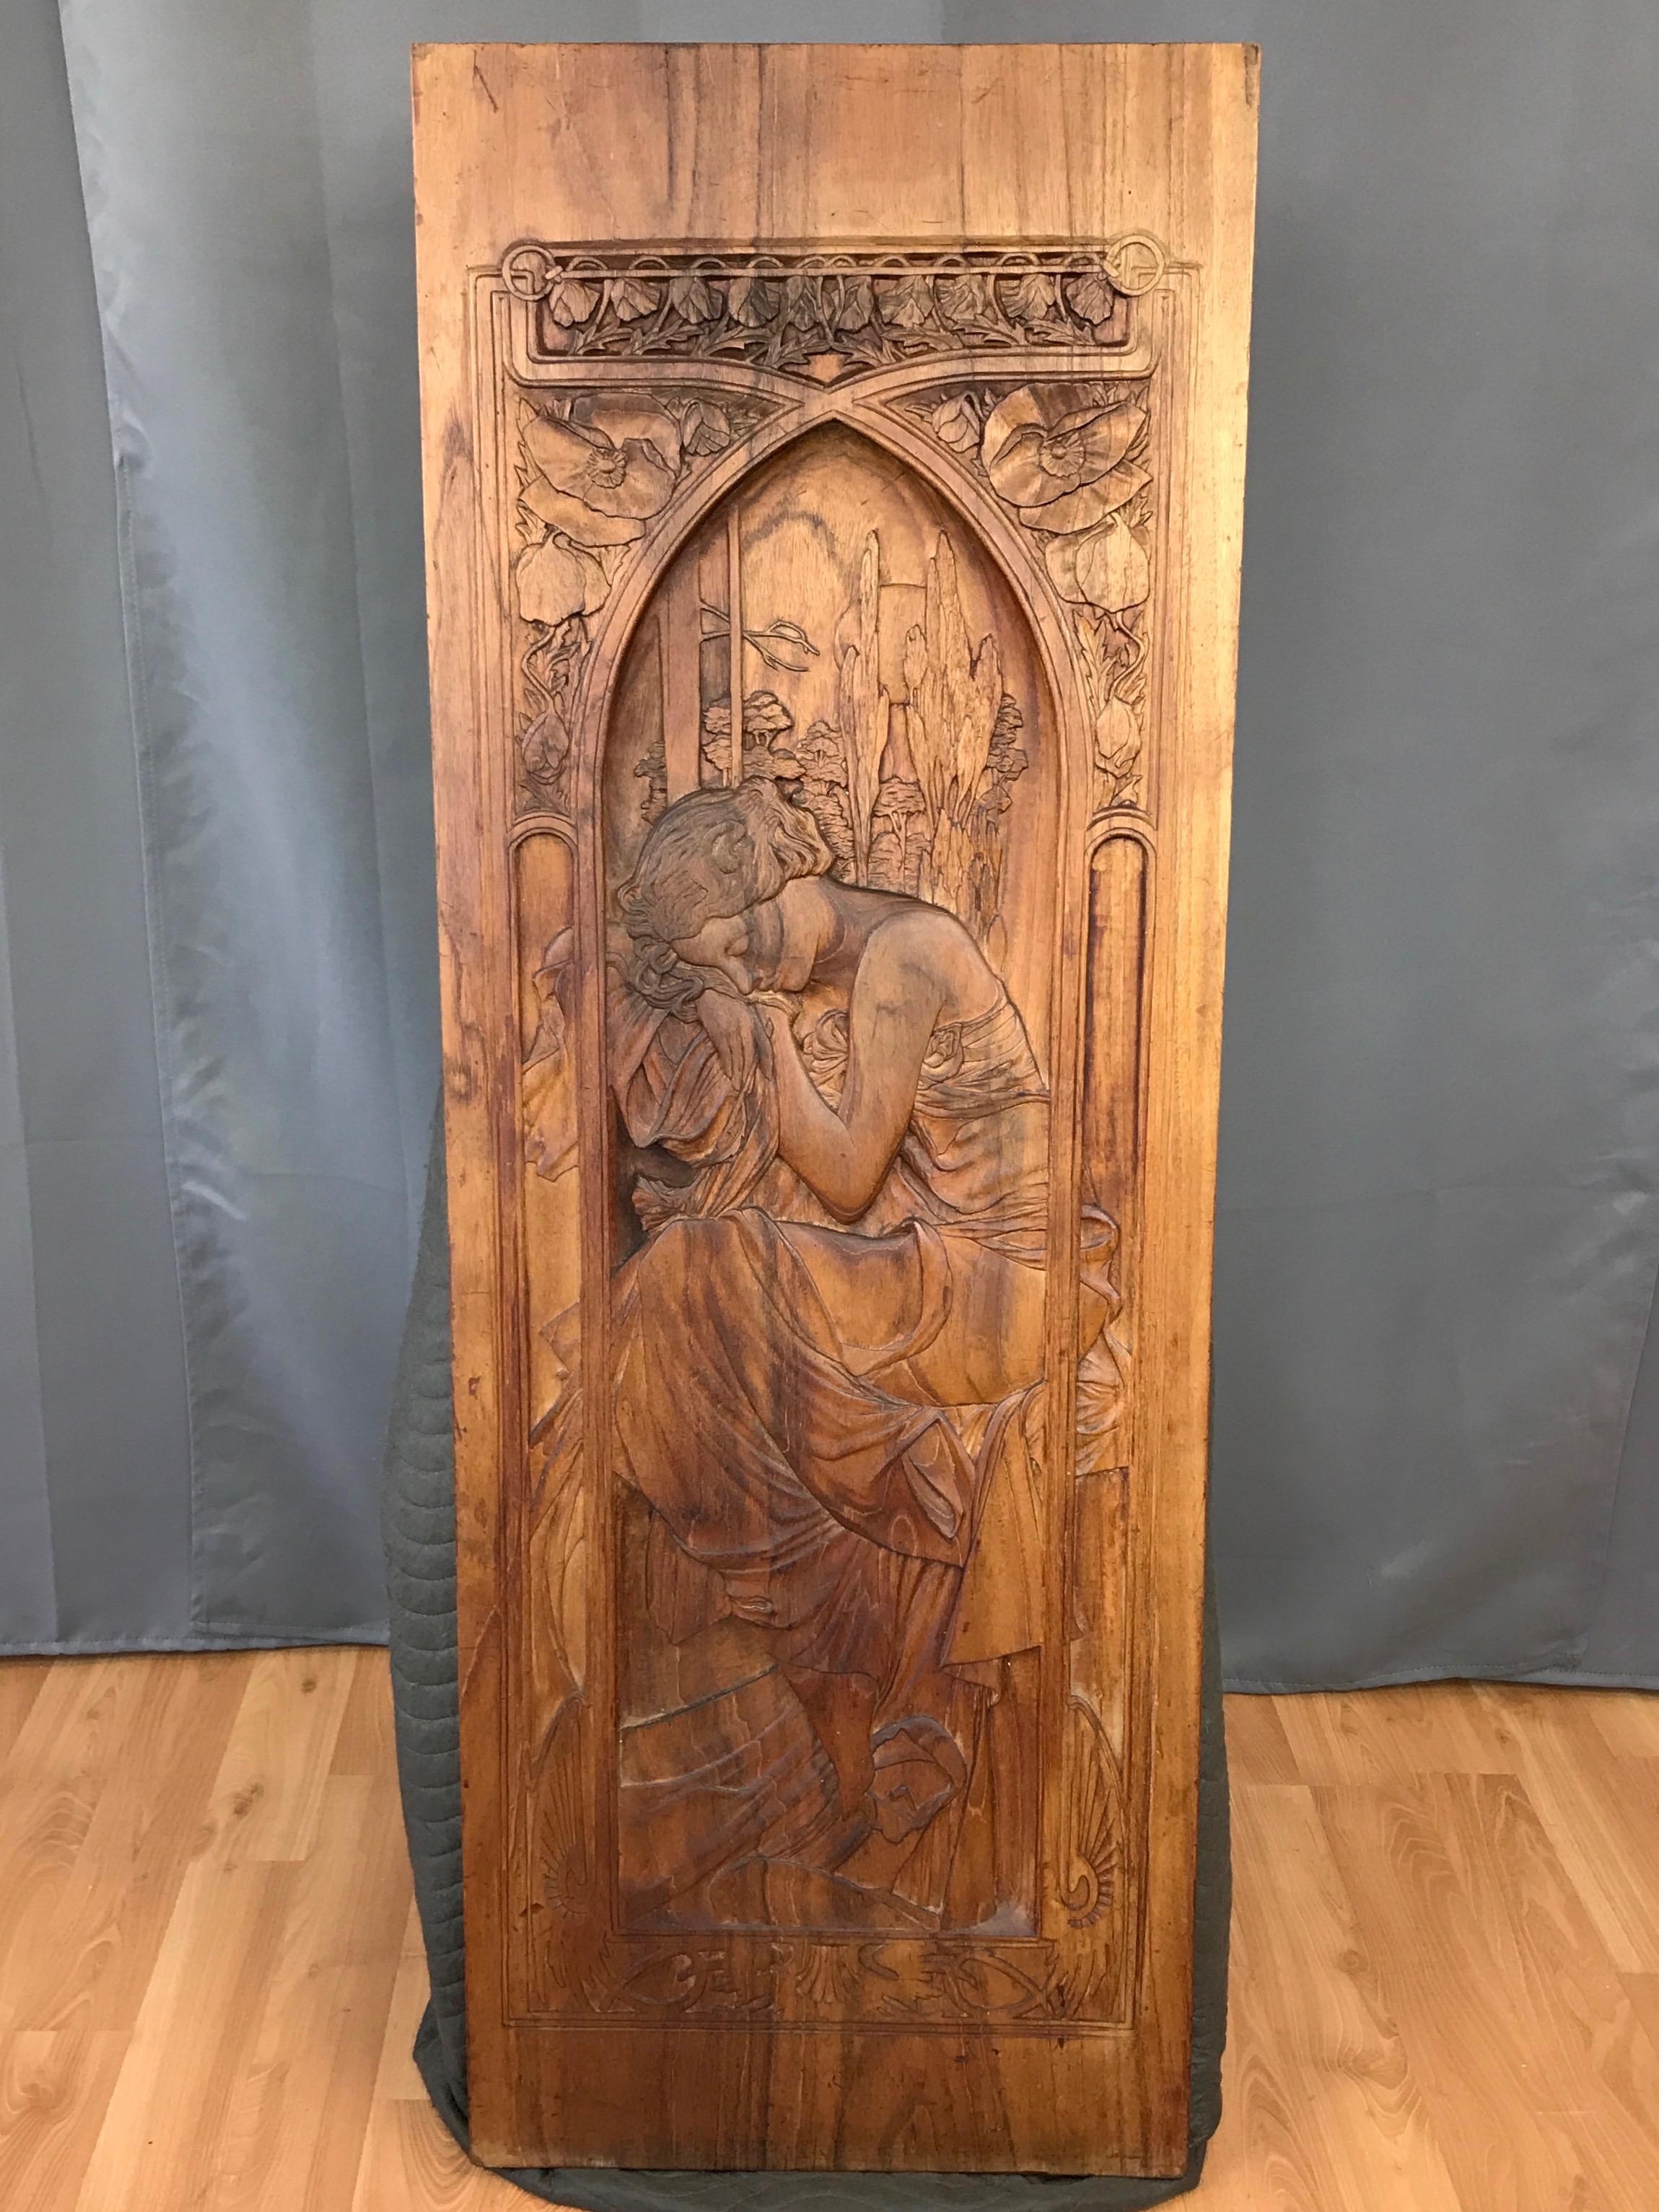 A substantial carved wood panel depicting iconic Art Nouveau artist Alphonse Mucha’s “Repos de la Nuit” from his 1899 series “The Times of the Day”.

Four-and-a-half foot-tall, nearly two inch-thick solid walnut plank with finely carved deep bas